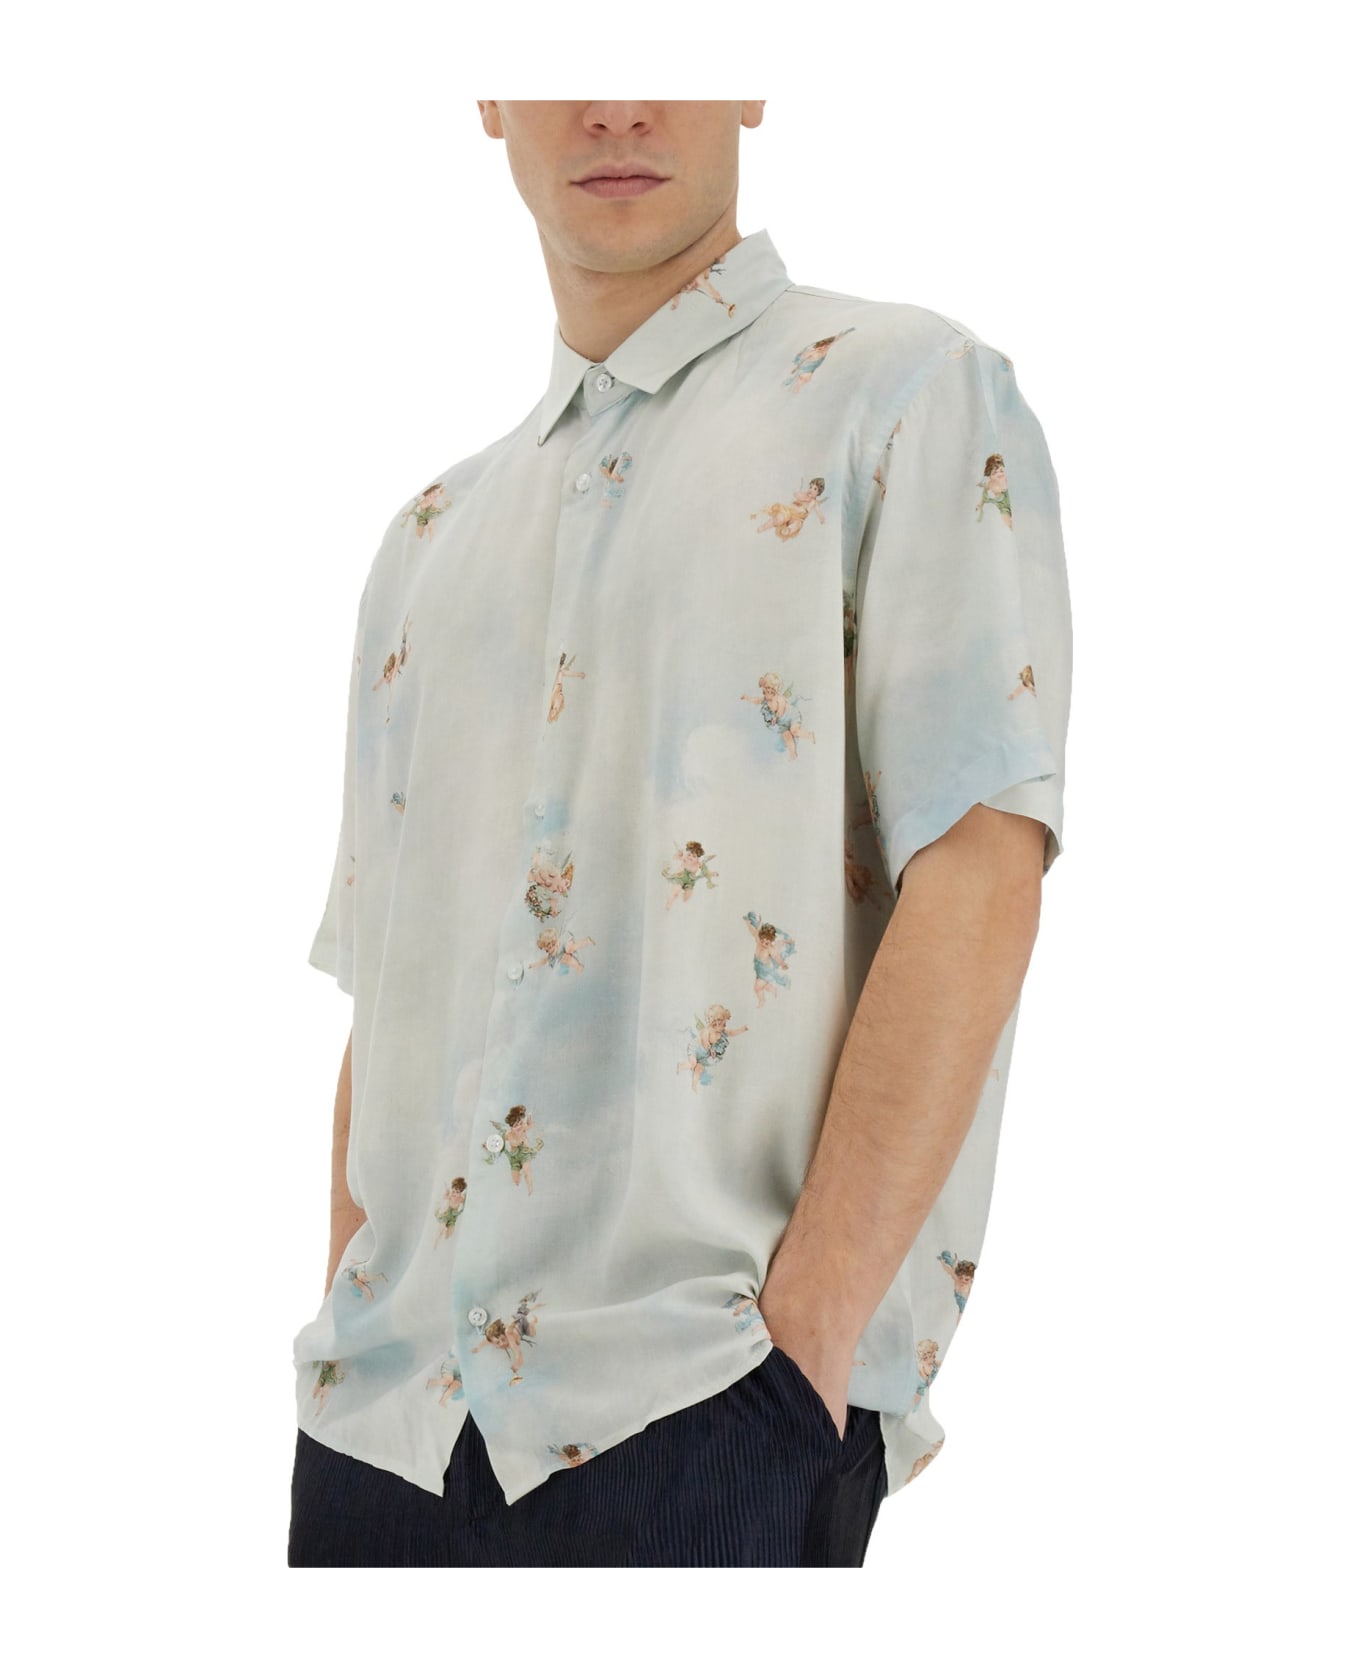 Family First Milano Printed Shirt - BLUE